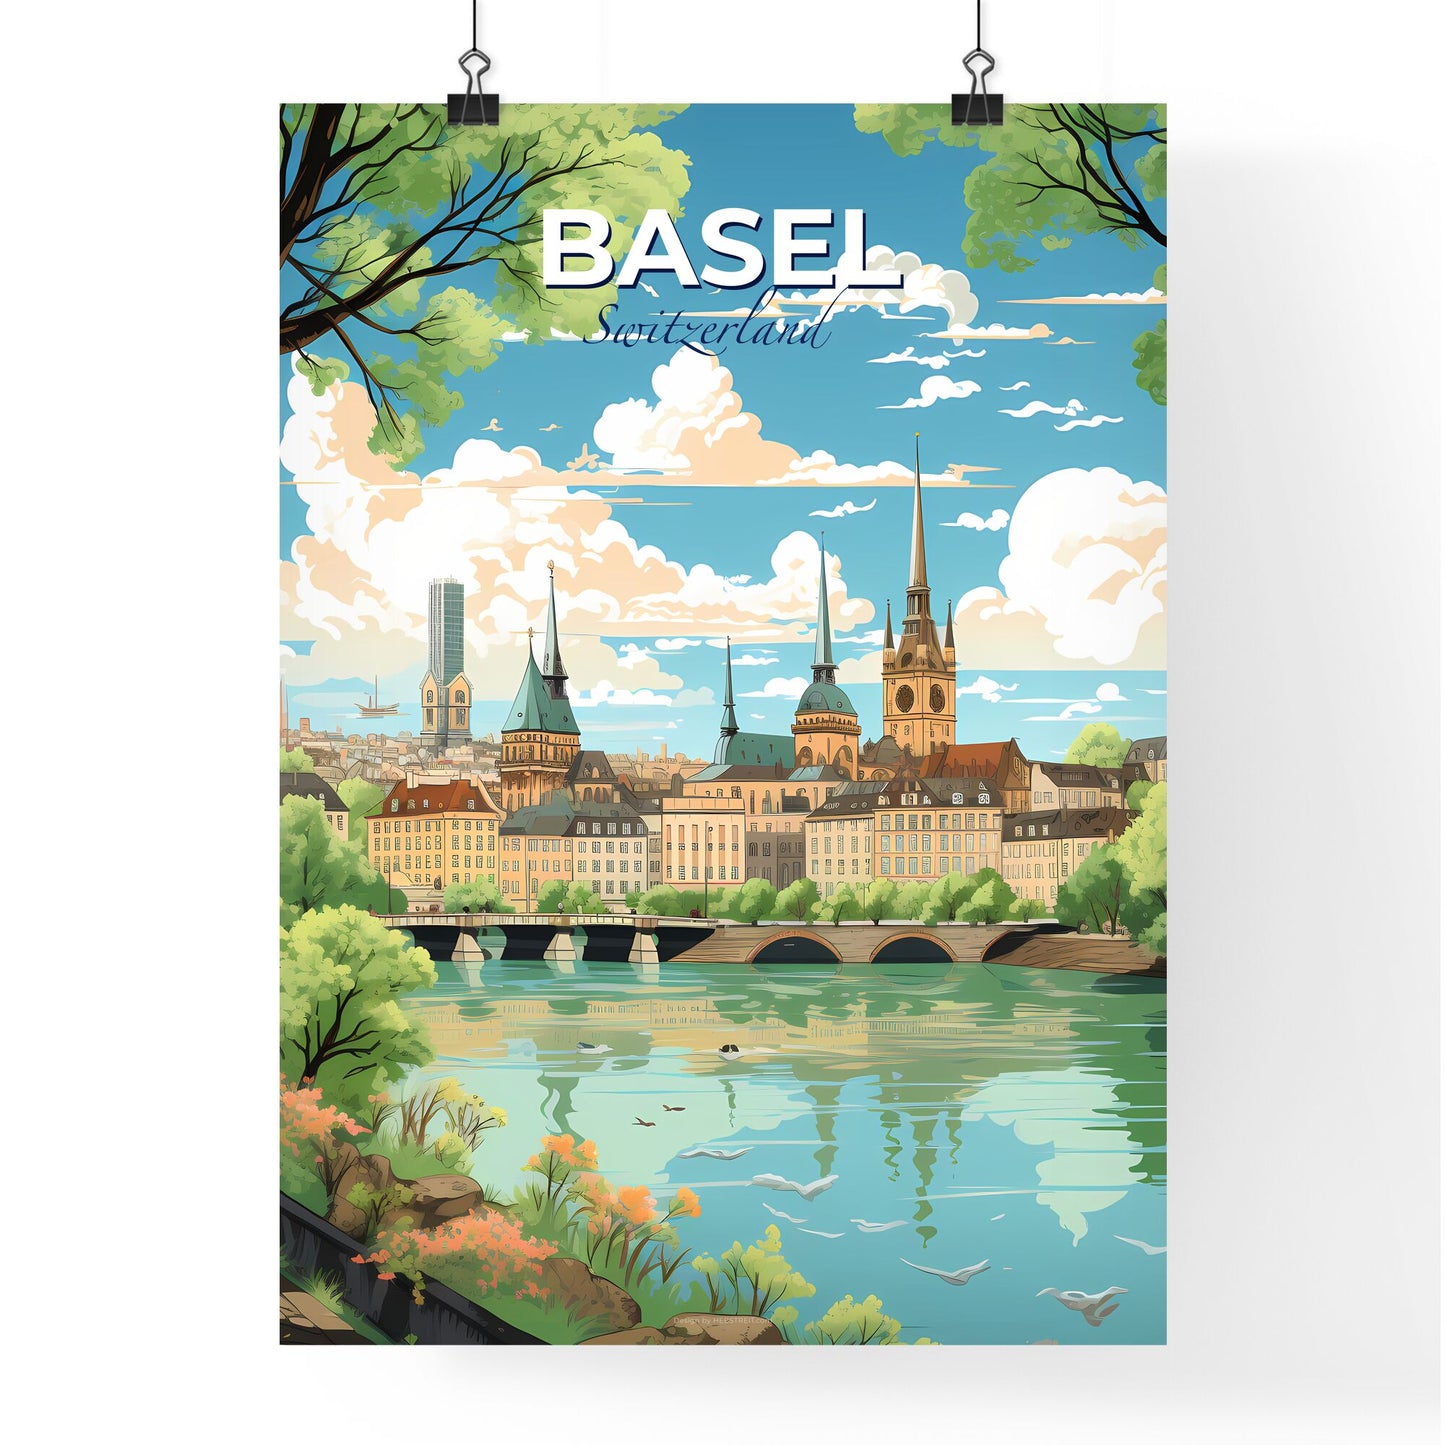 Basel Switzerland Skyline - A City With Trees And A Bridge Over Water - Customizable Travel Gift Default Title